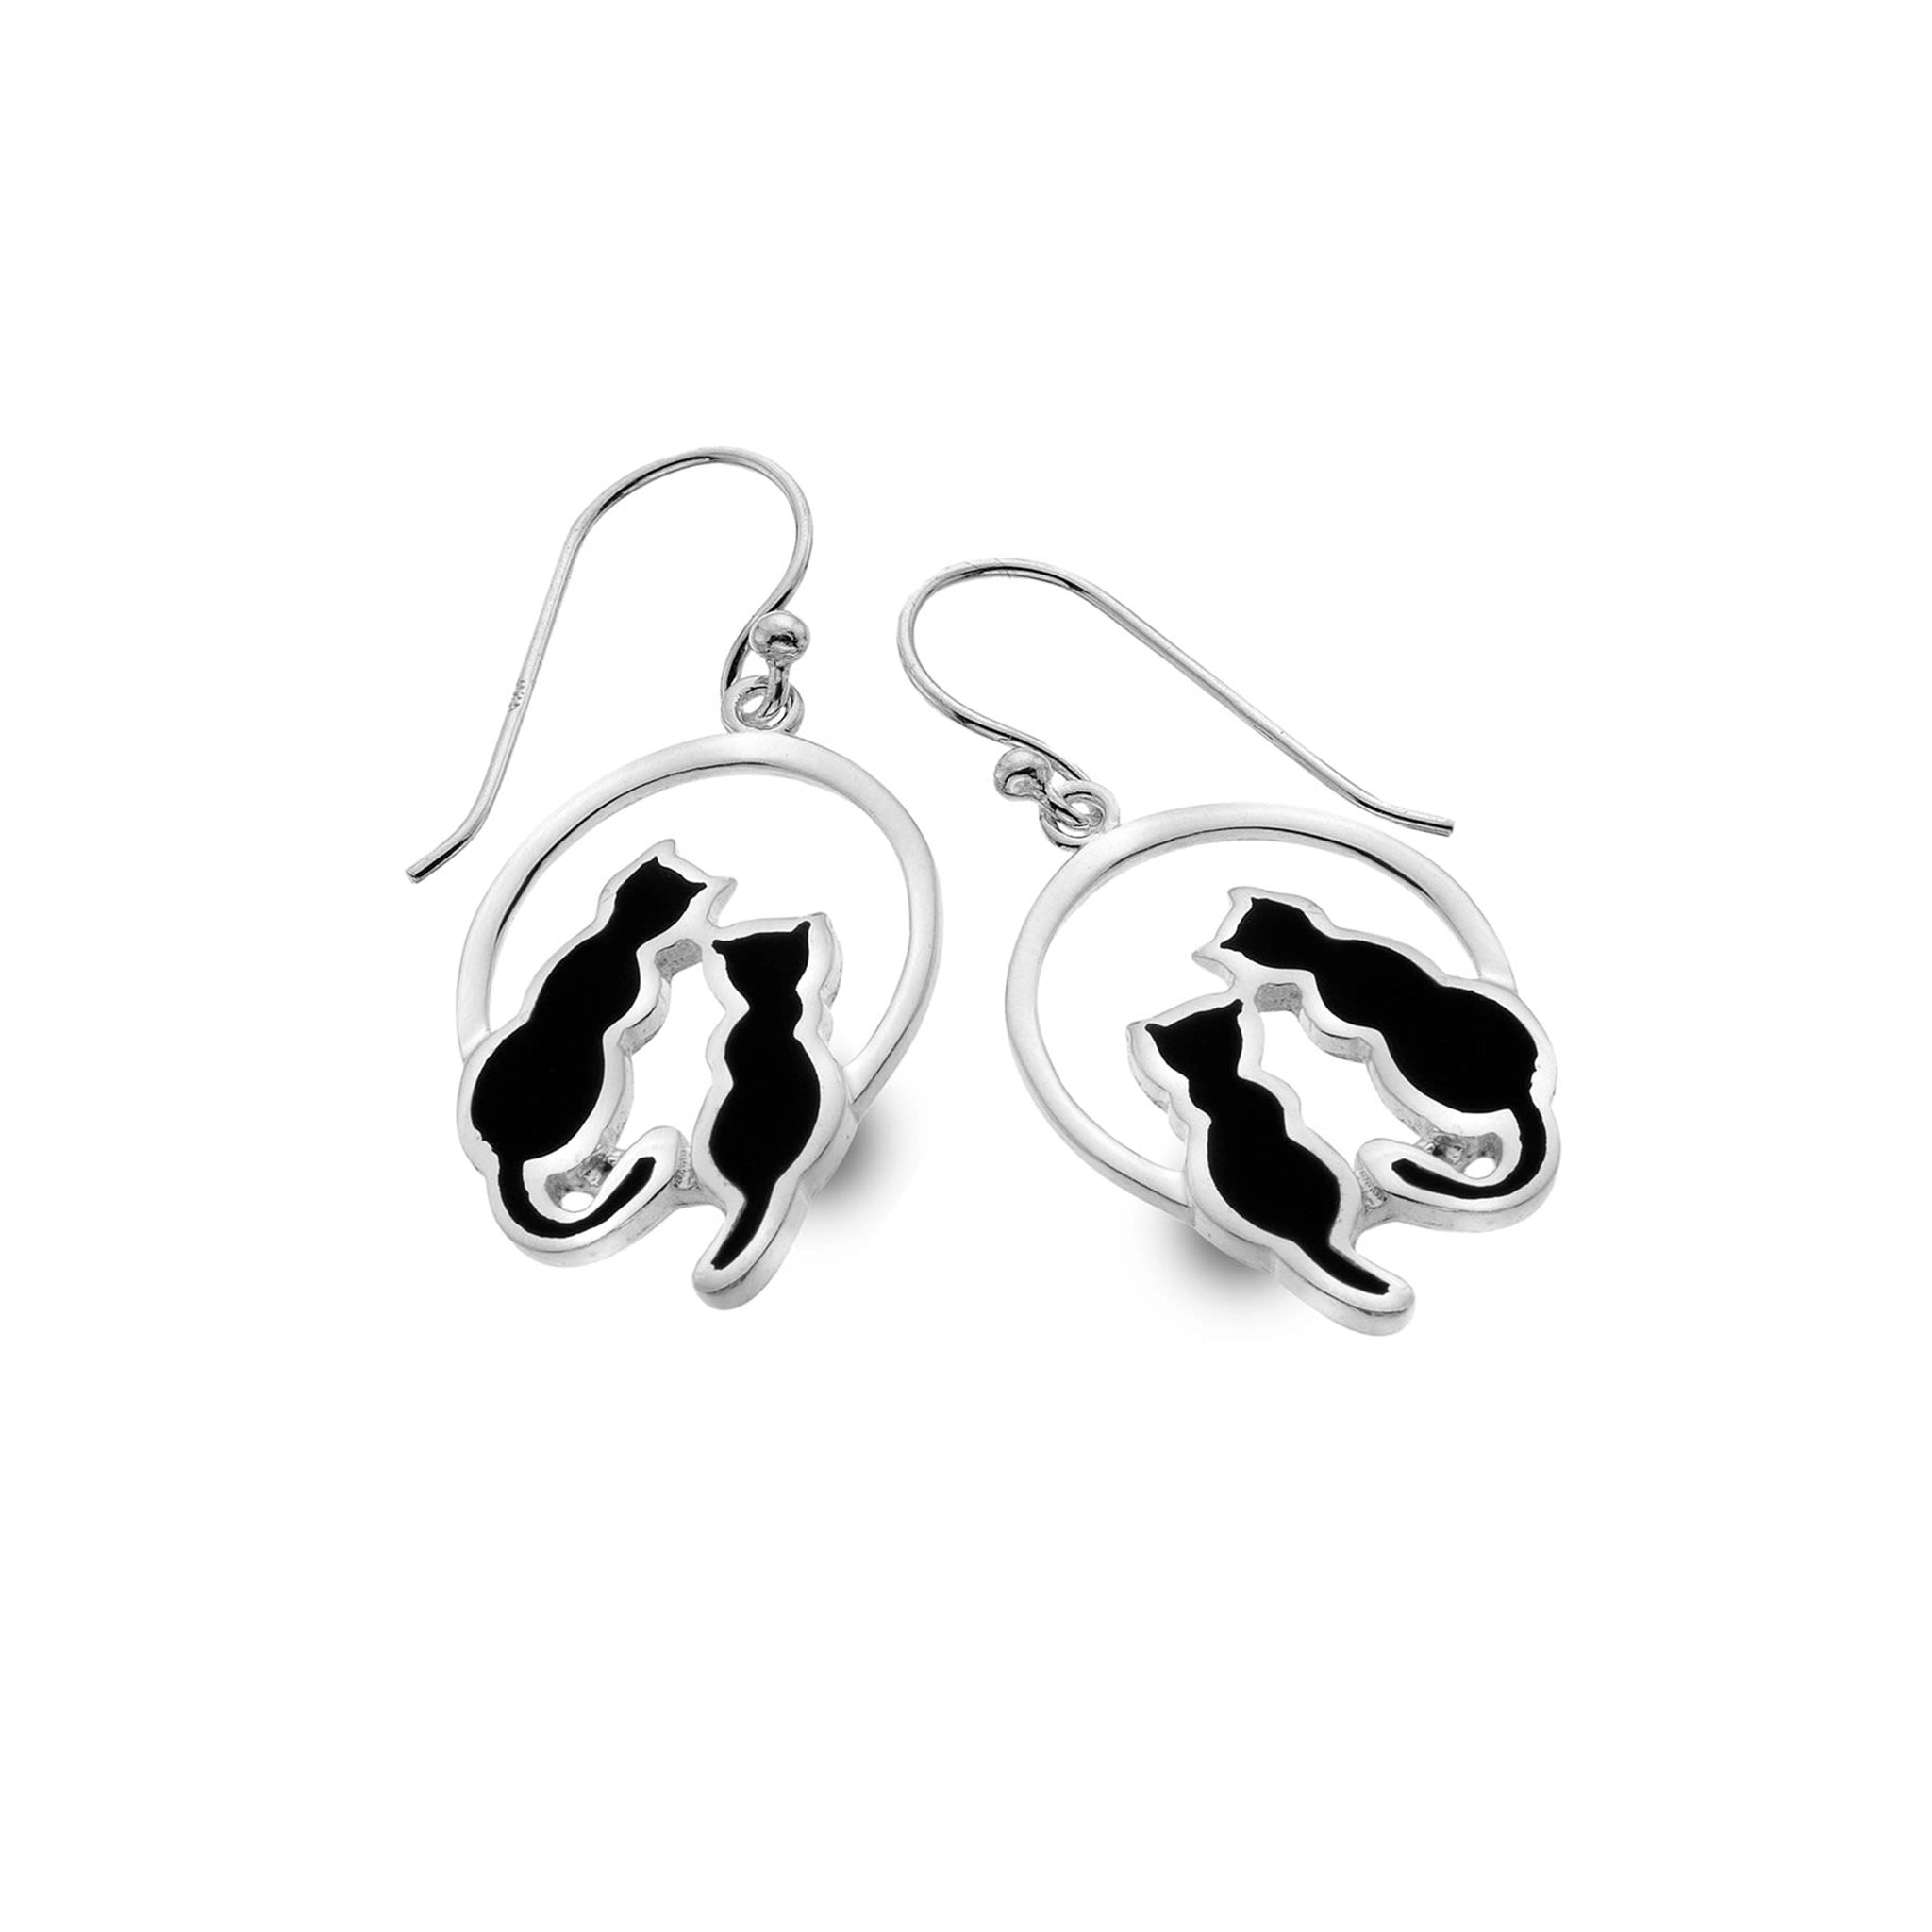 A silver pair of drop earrings featuring round hoops with two sitting black cats and hook fittings